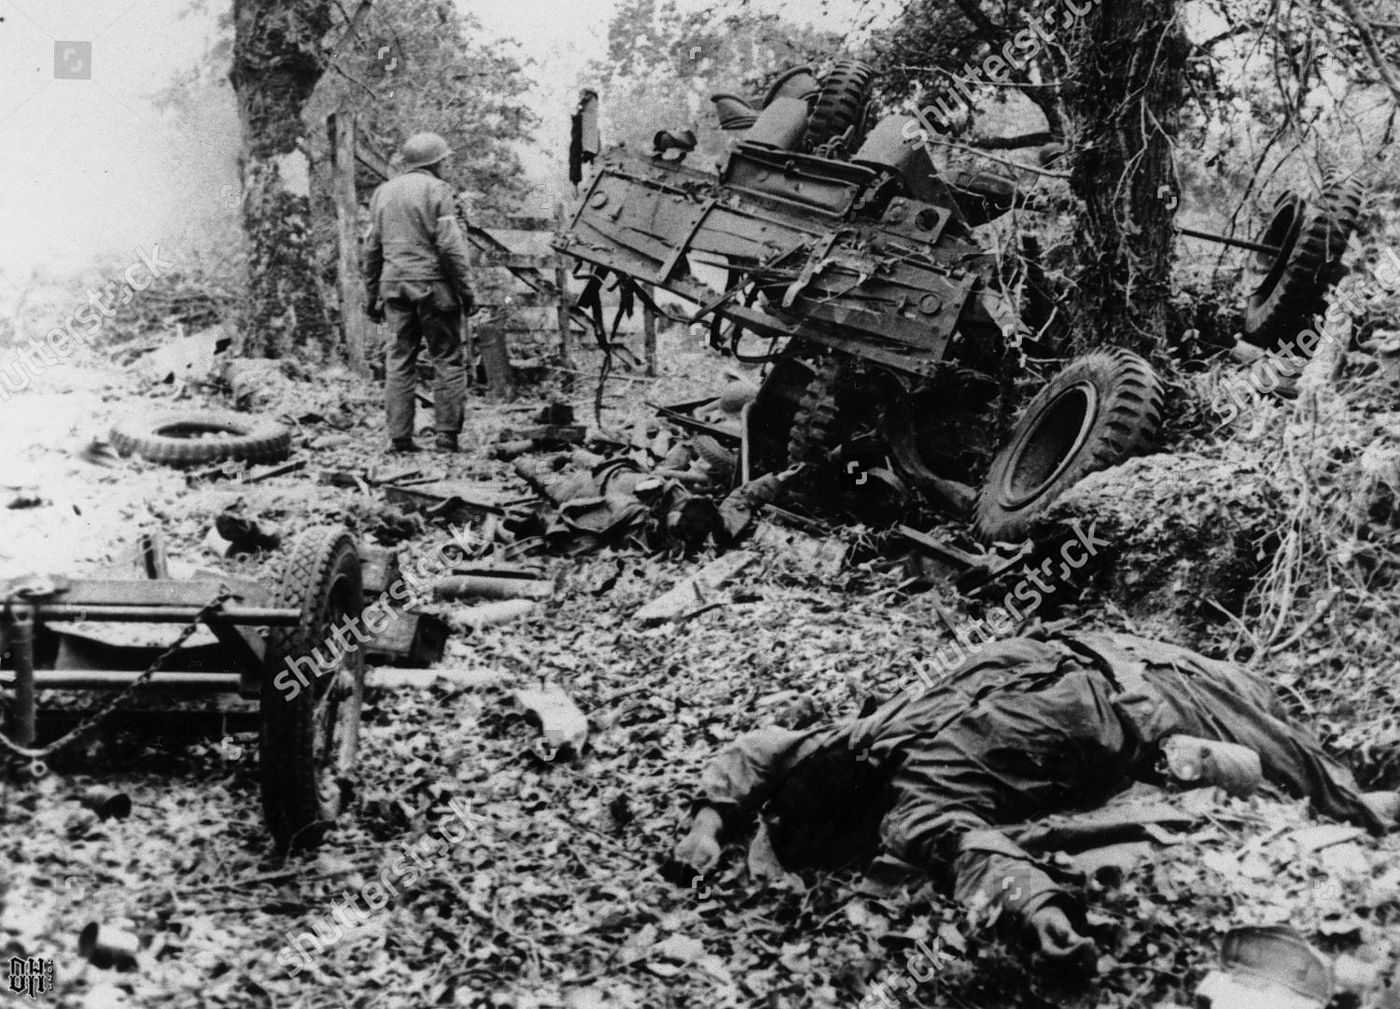 DH - Dead US Soldiers 32 - Killed in combat by German mortar shells, are sprawled across the g...jpg